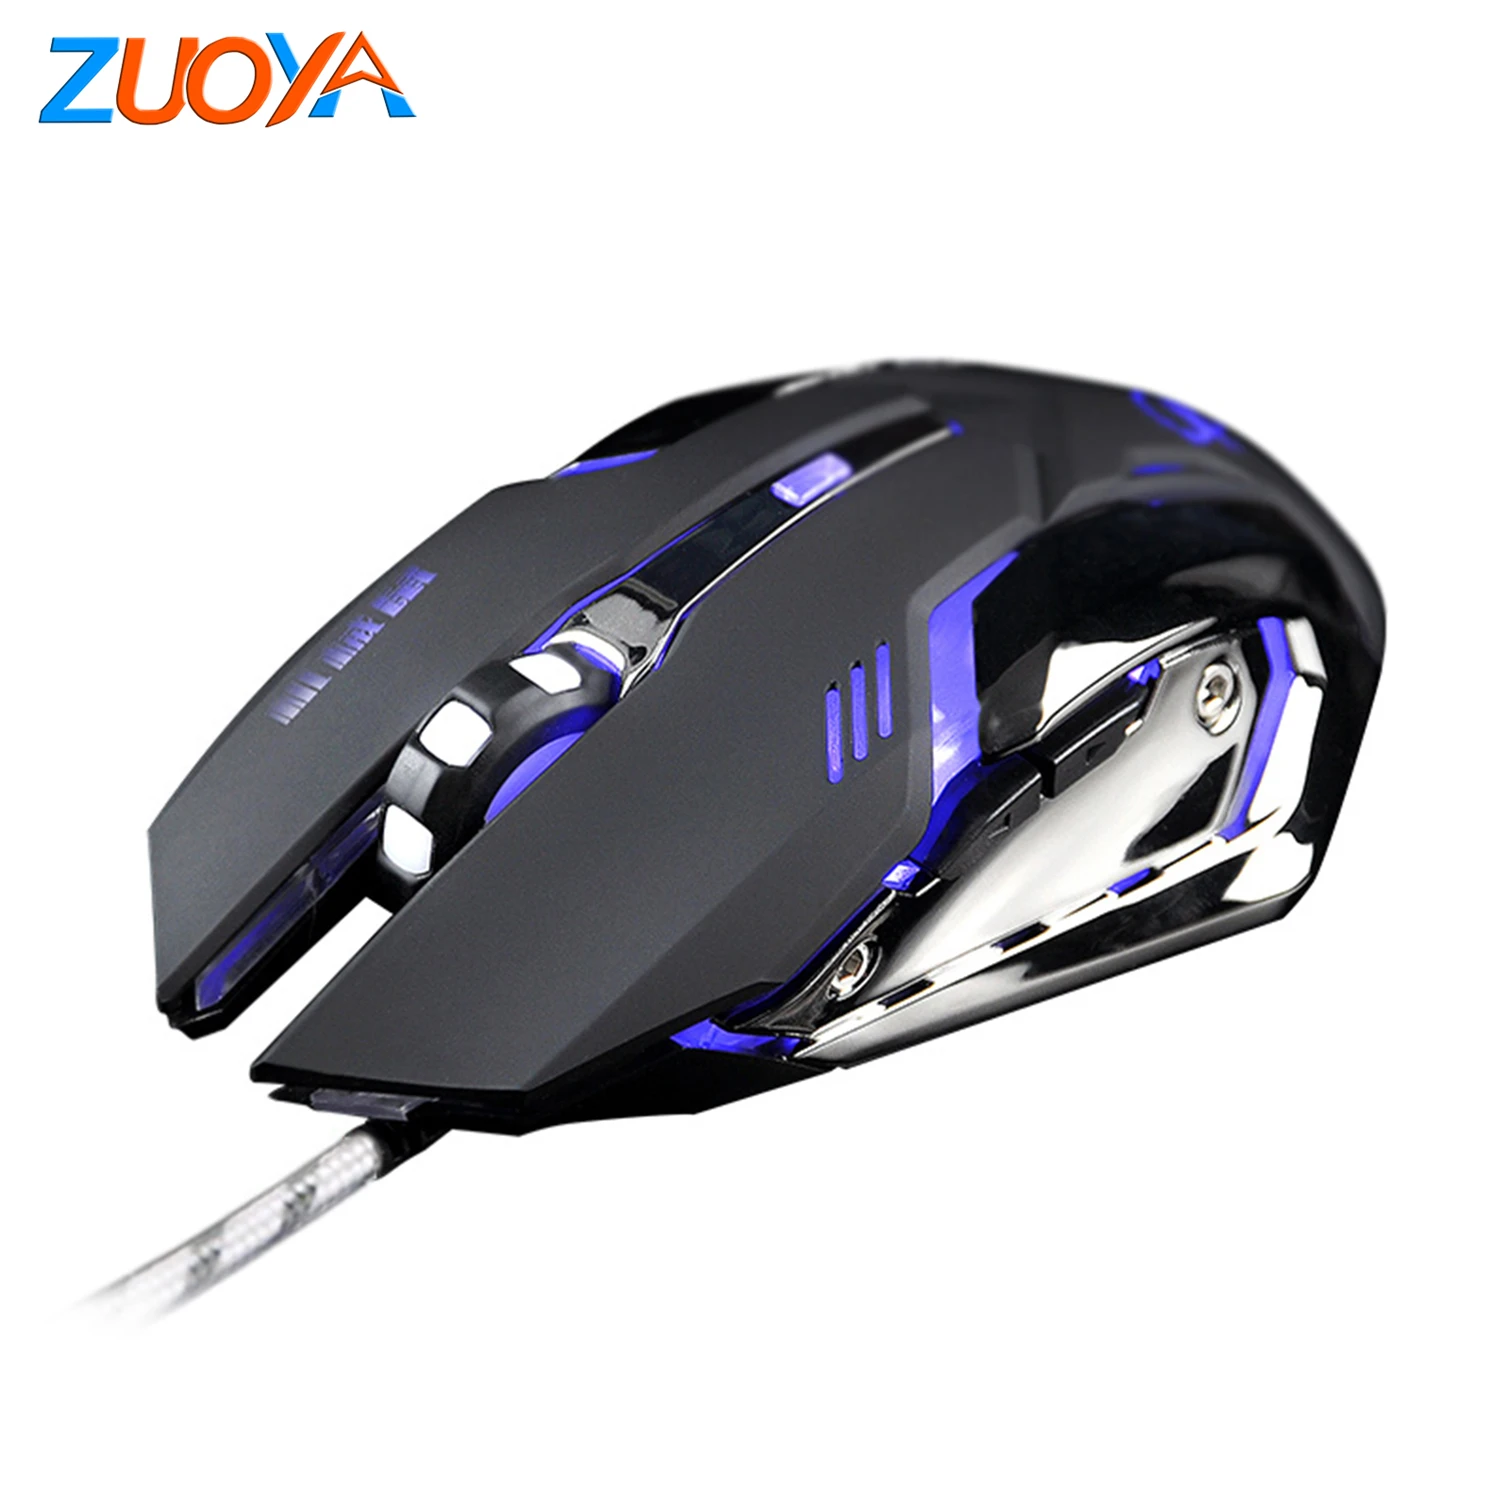 Gaming Mouse 6 Buttons Adjustable 3200DPI Optical Macro Programming wired USB Game Mouse 4 Color Breathing Variable Light Mice